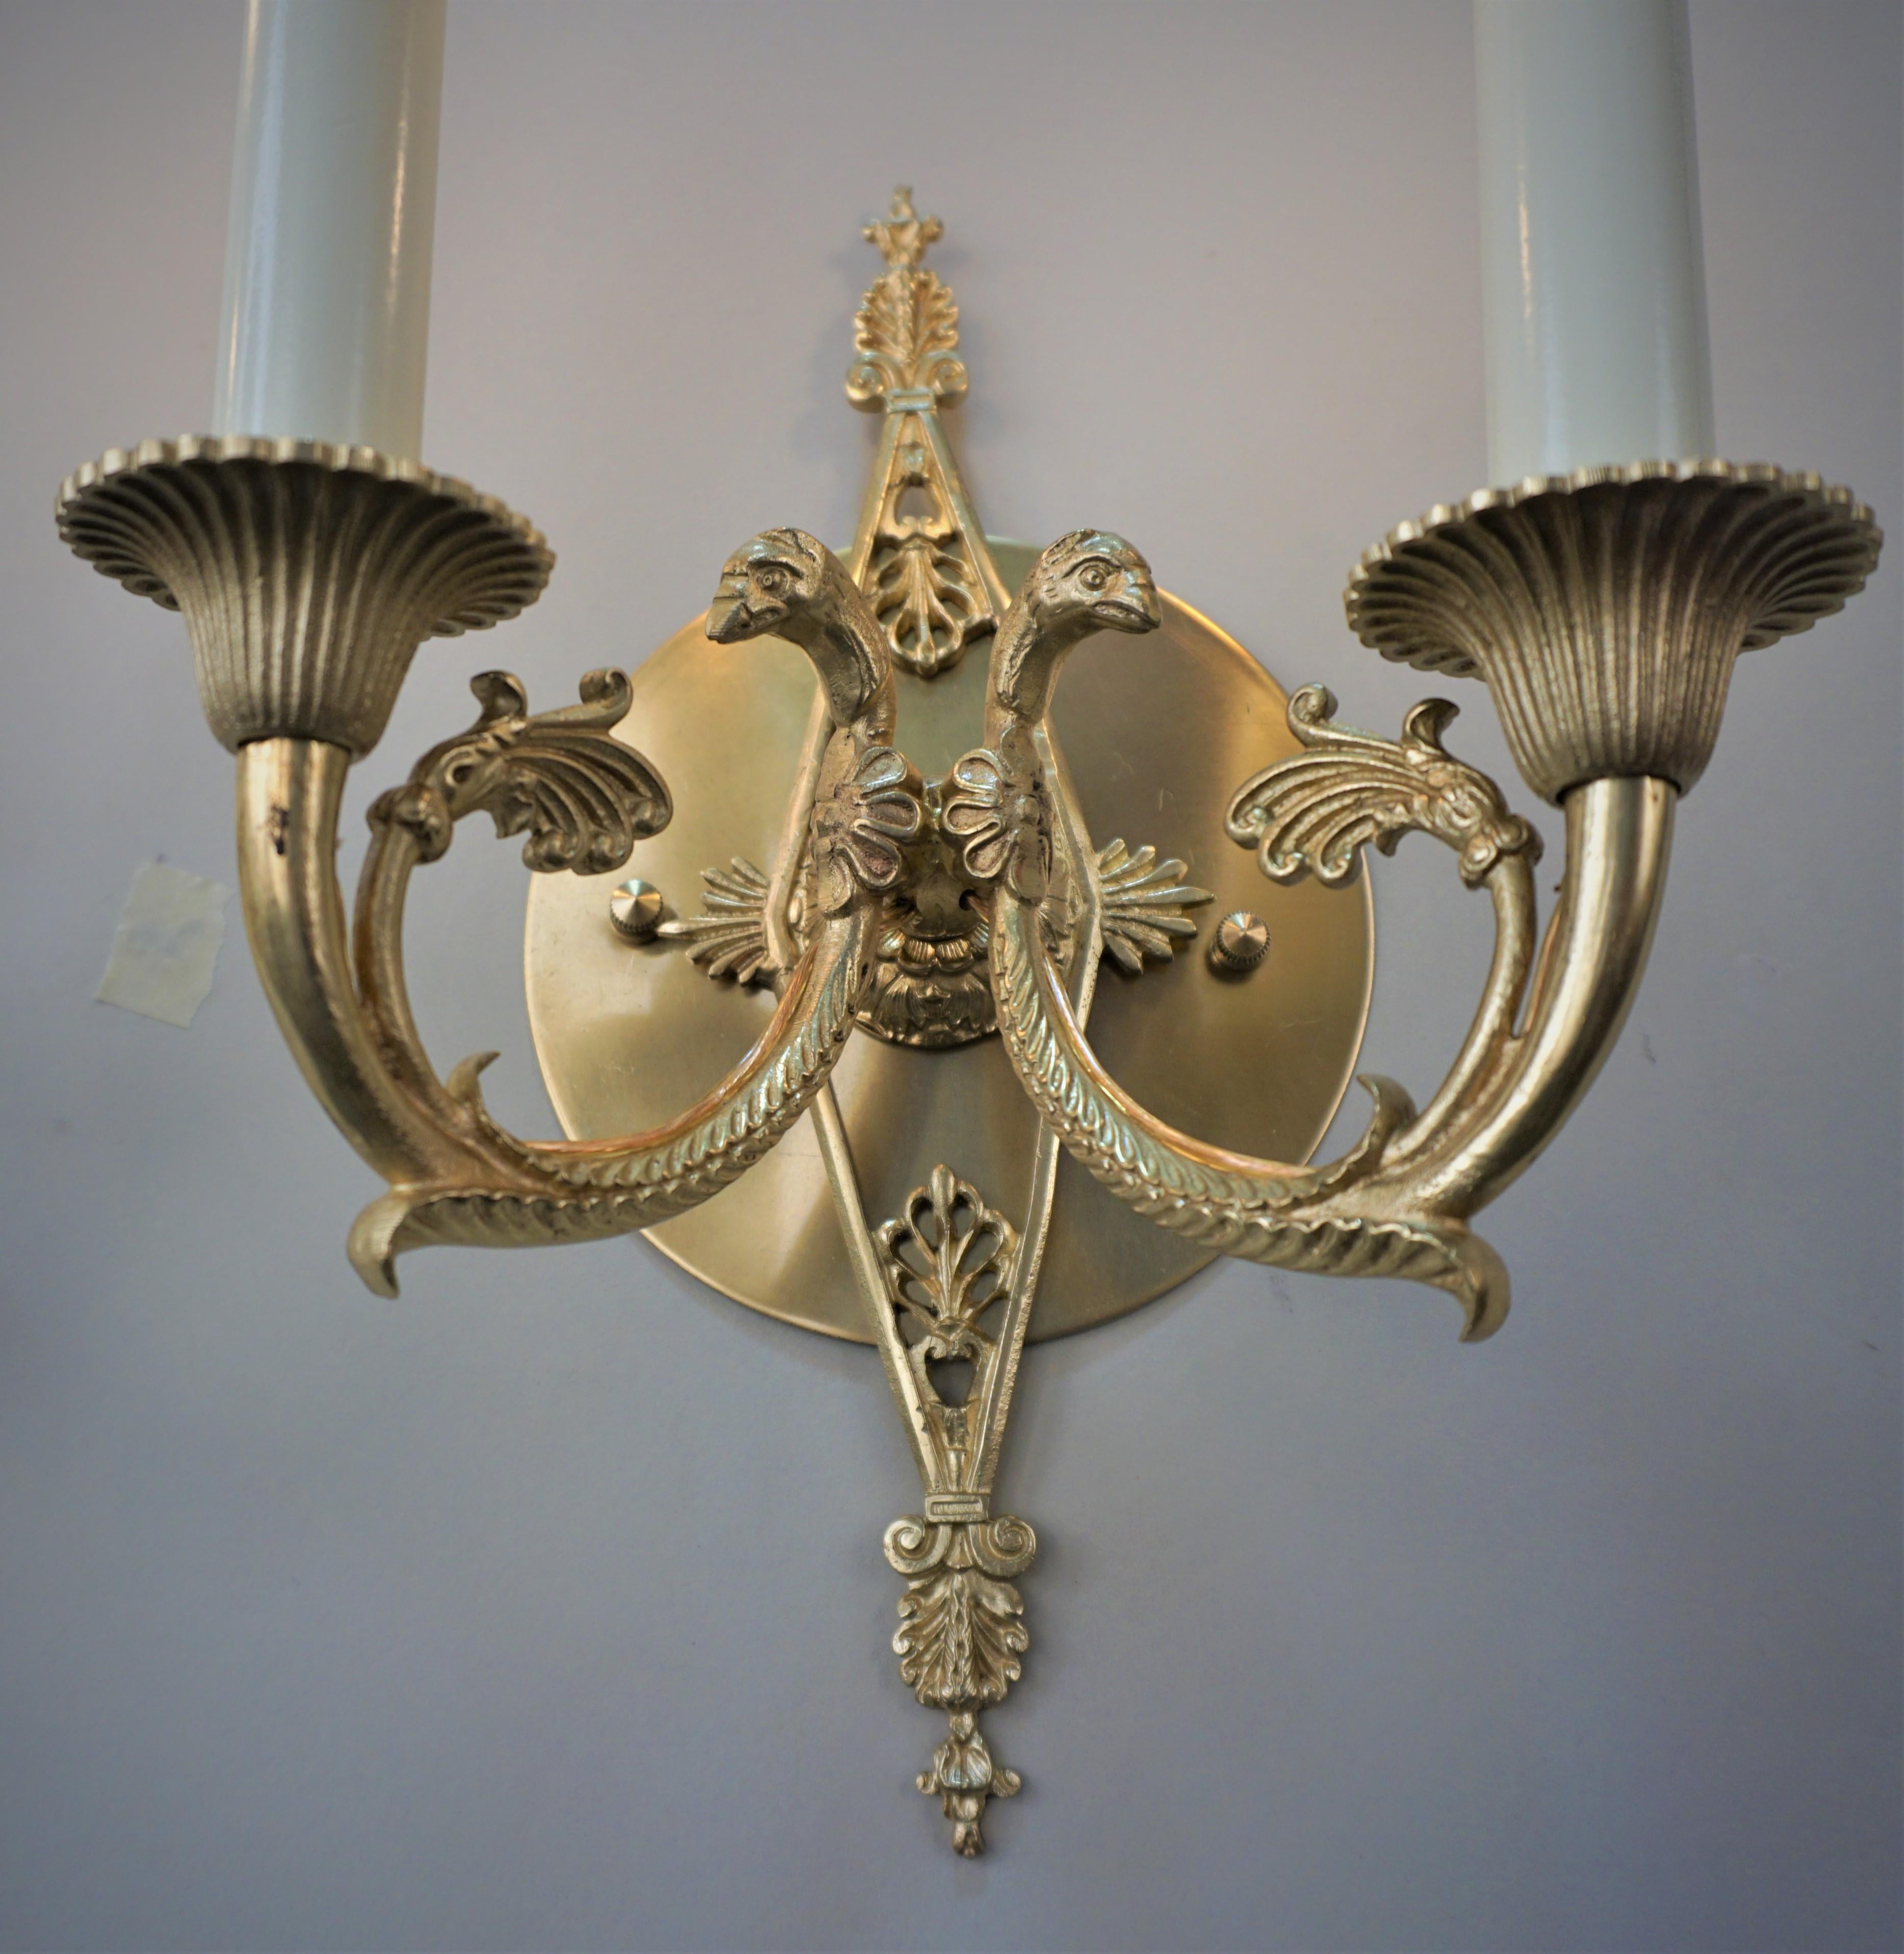 Pair of 1920's Bronze Wall Sconces In Good Condition For Sale In Fairfax, VA